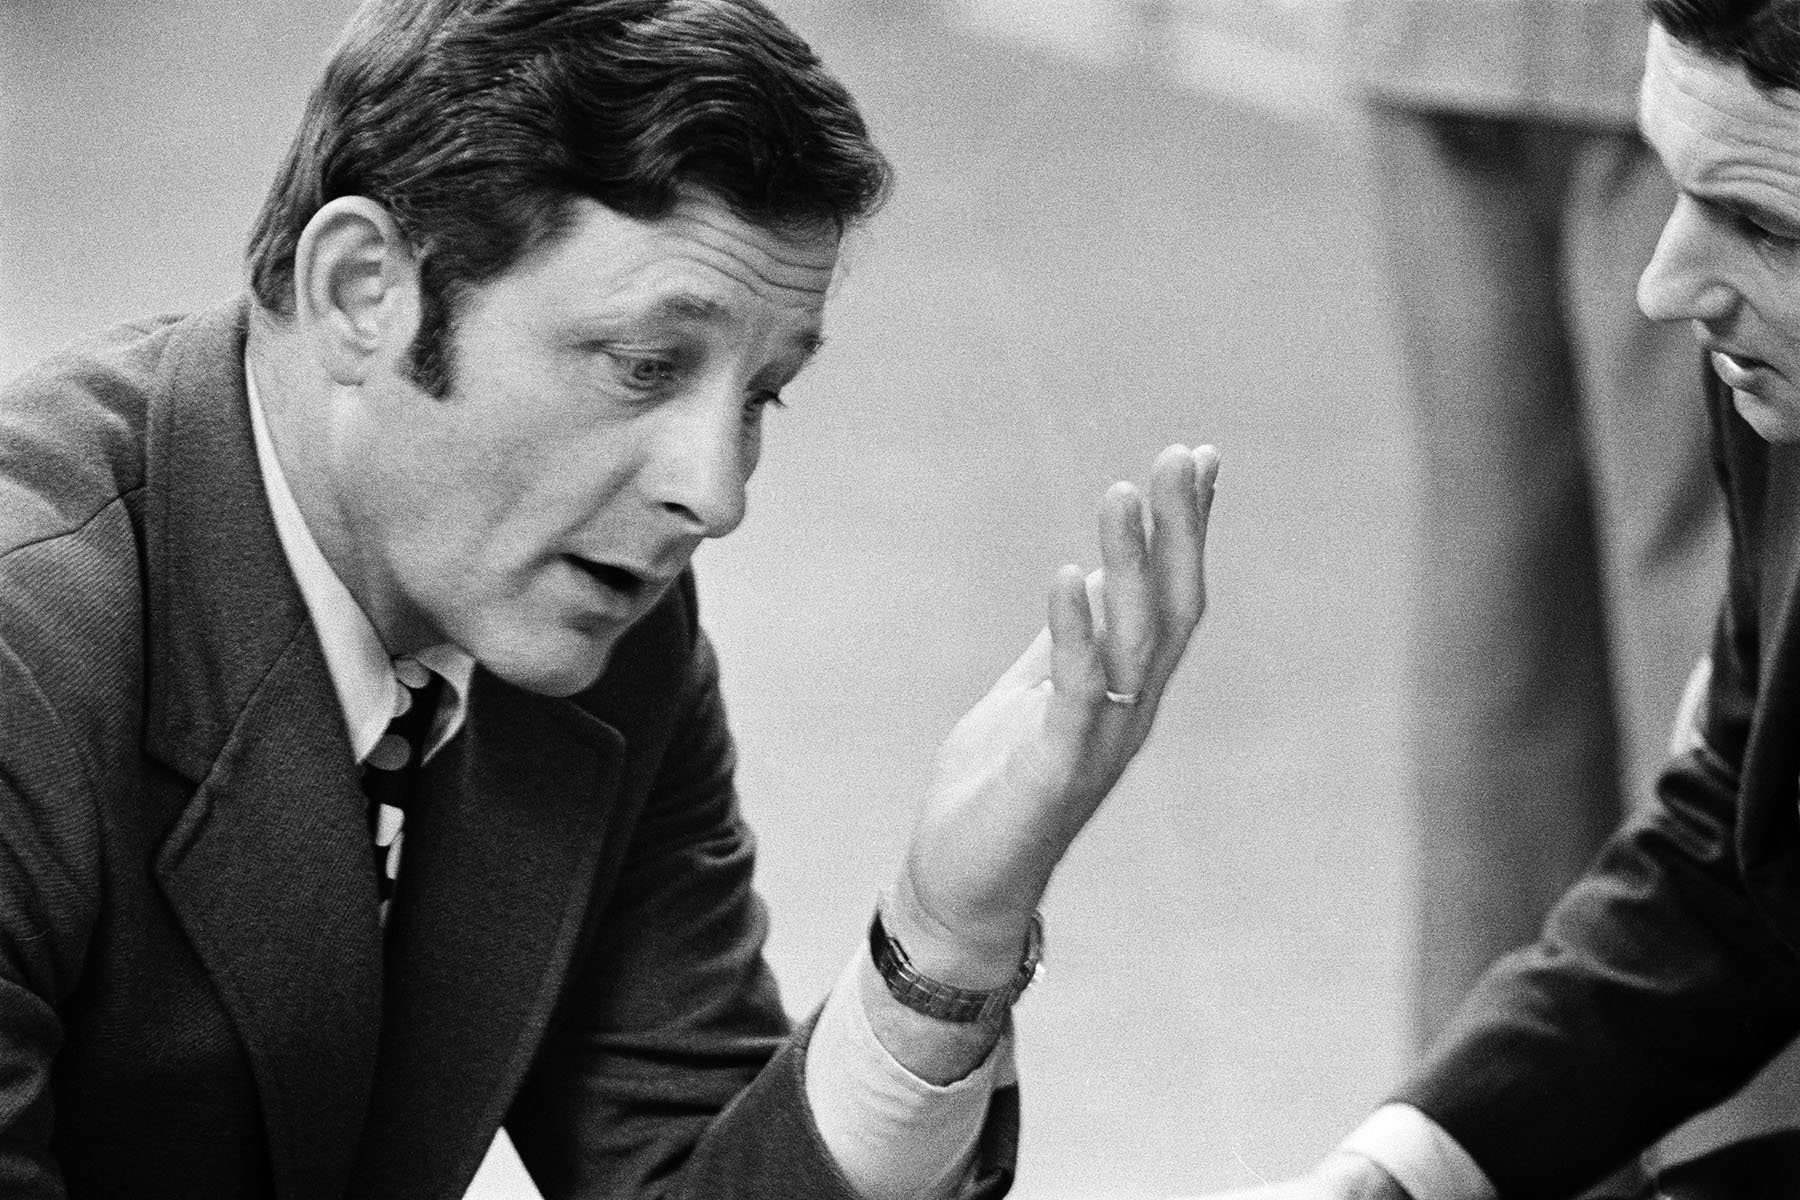 Sen. Birch Evans Bayh speaks to someone at the National Democratic Issues Convention in 1975